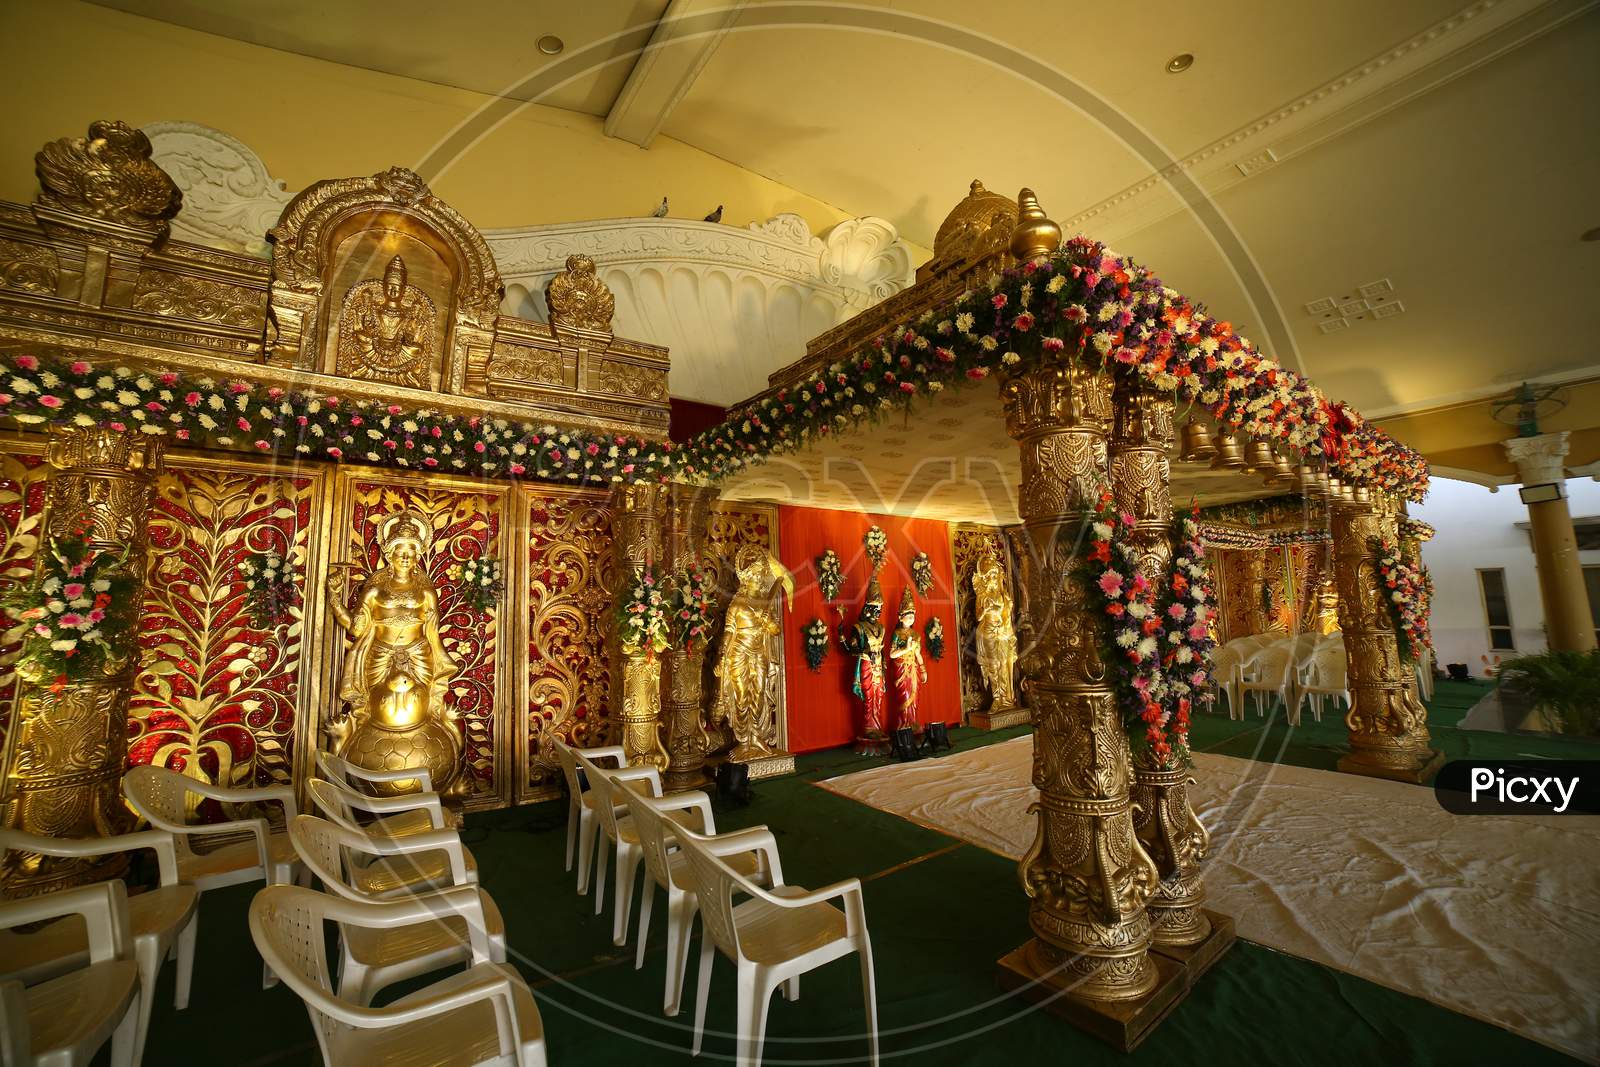 View of a well decorated stage of a event